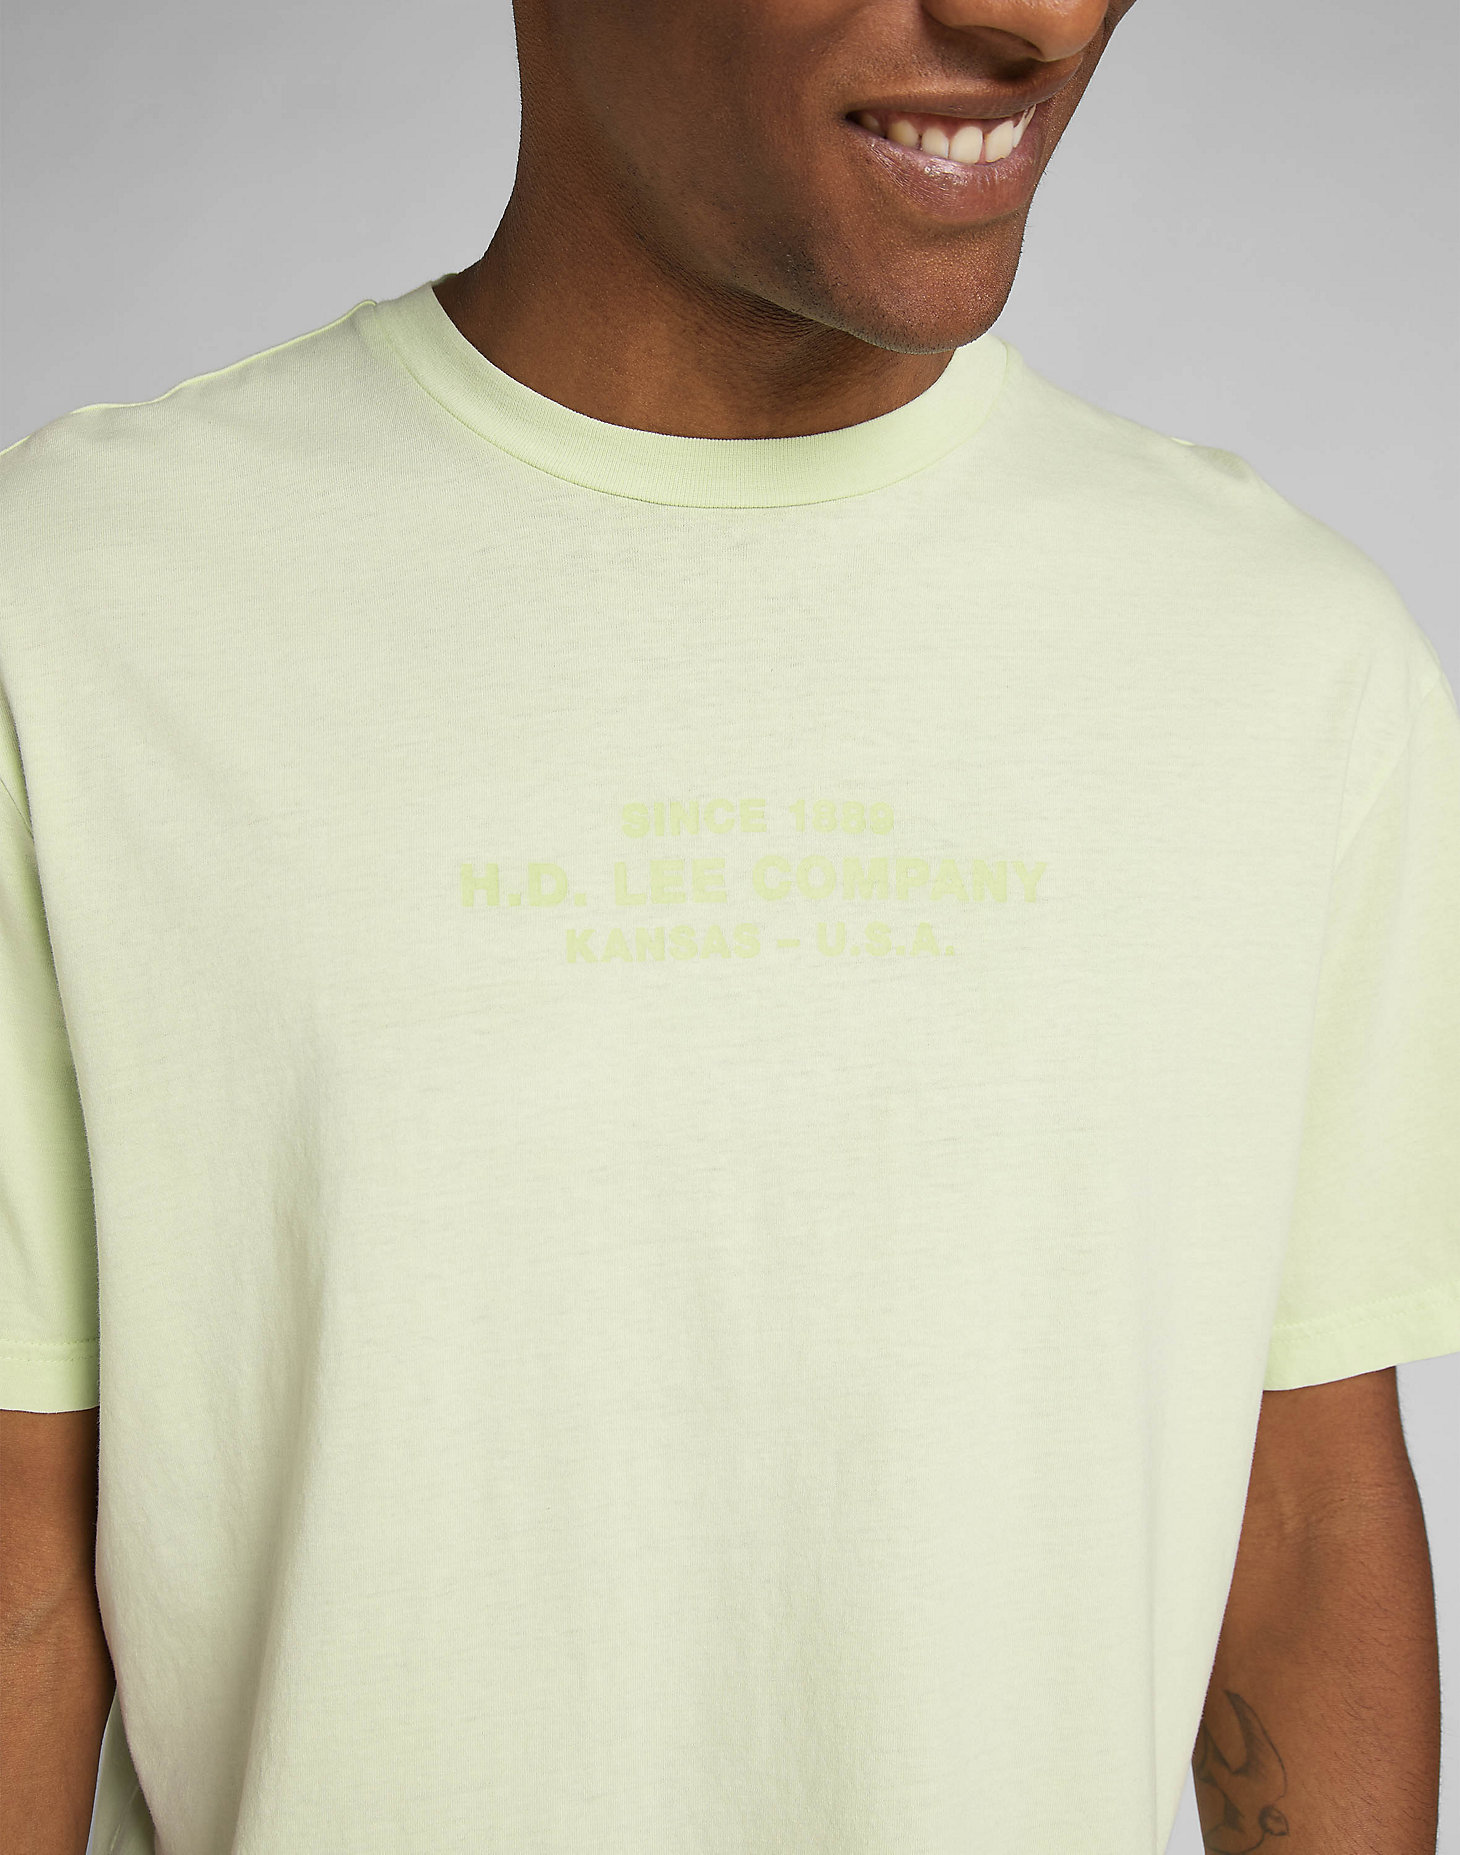 Logo Loose Tee in Canary Green alternative view 4